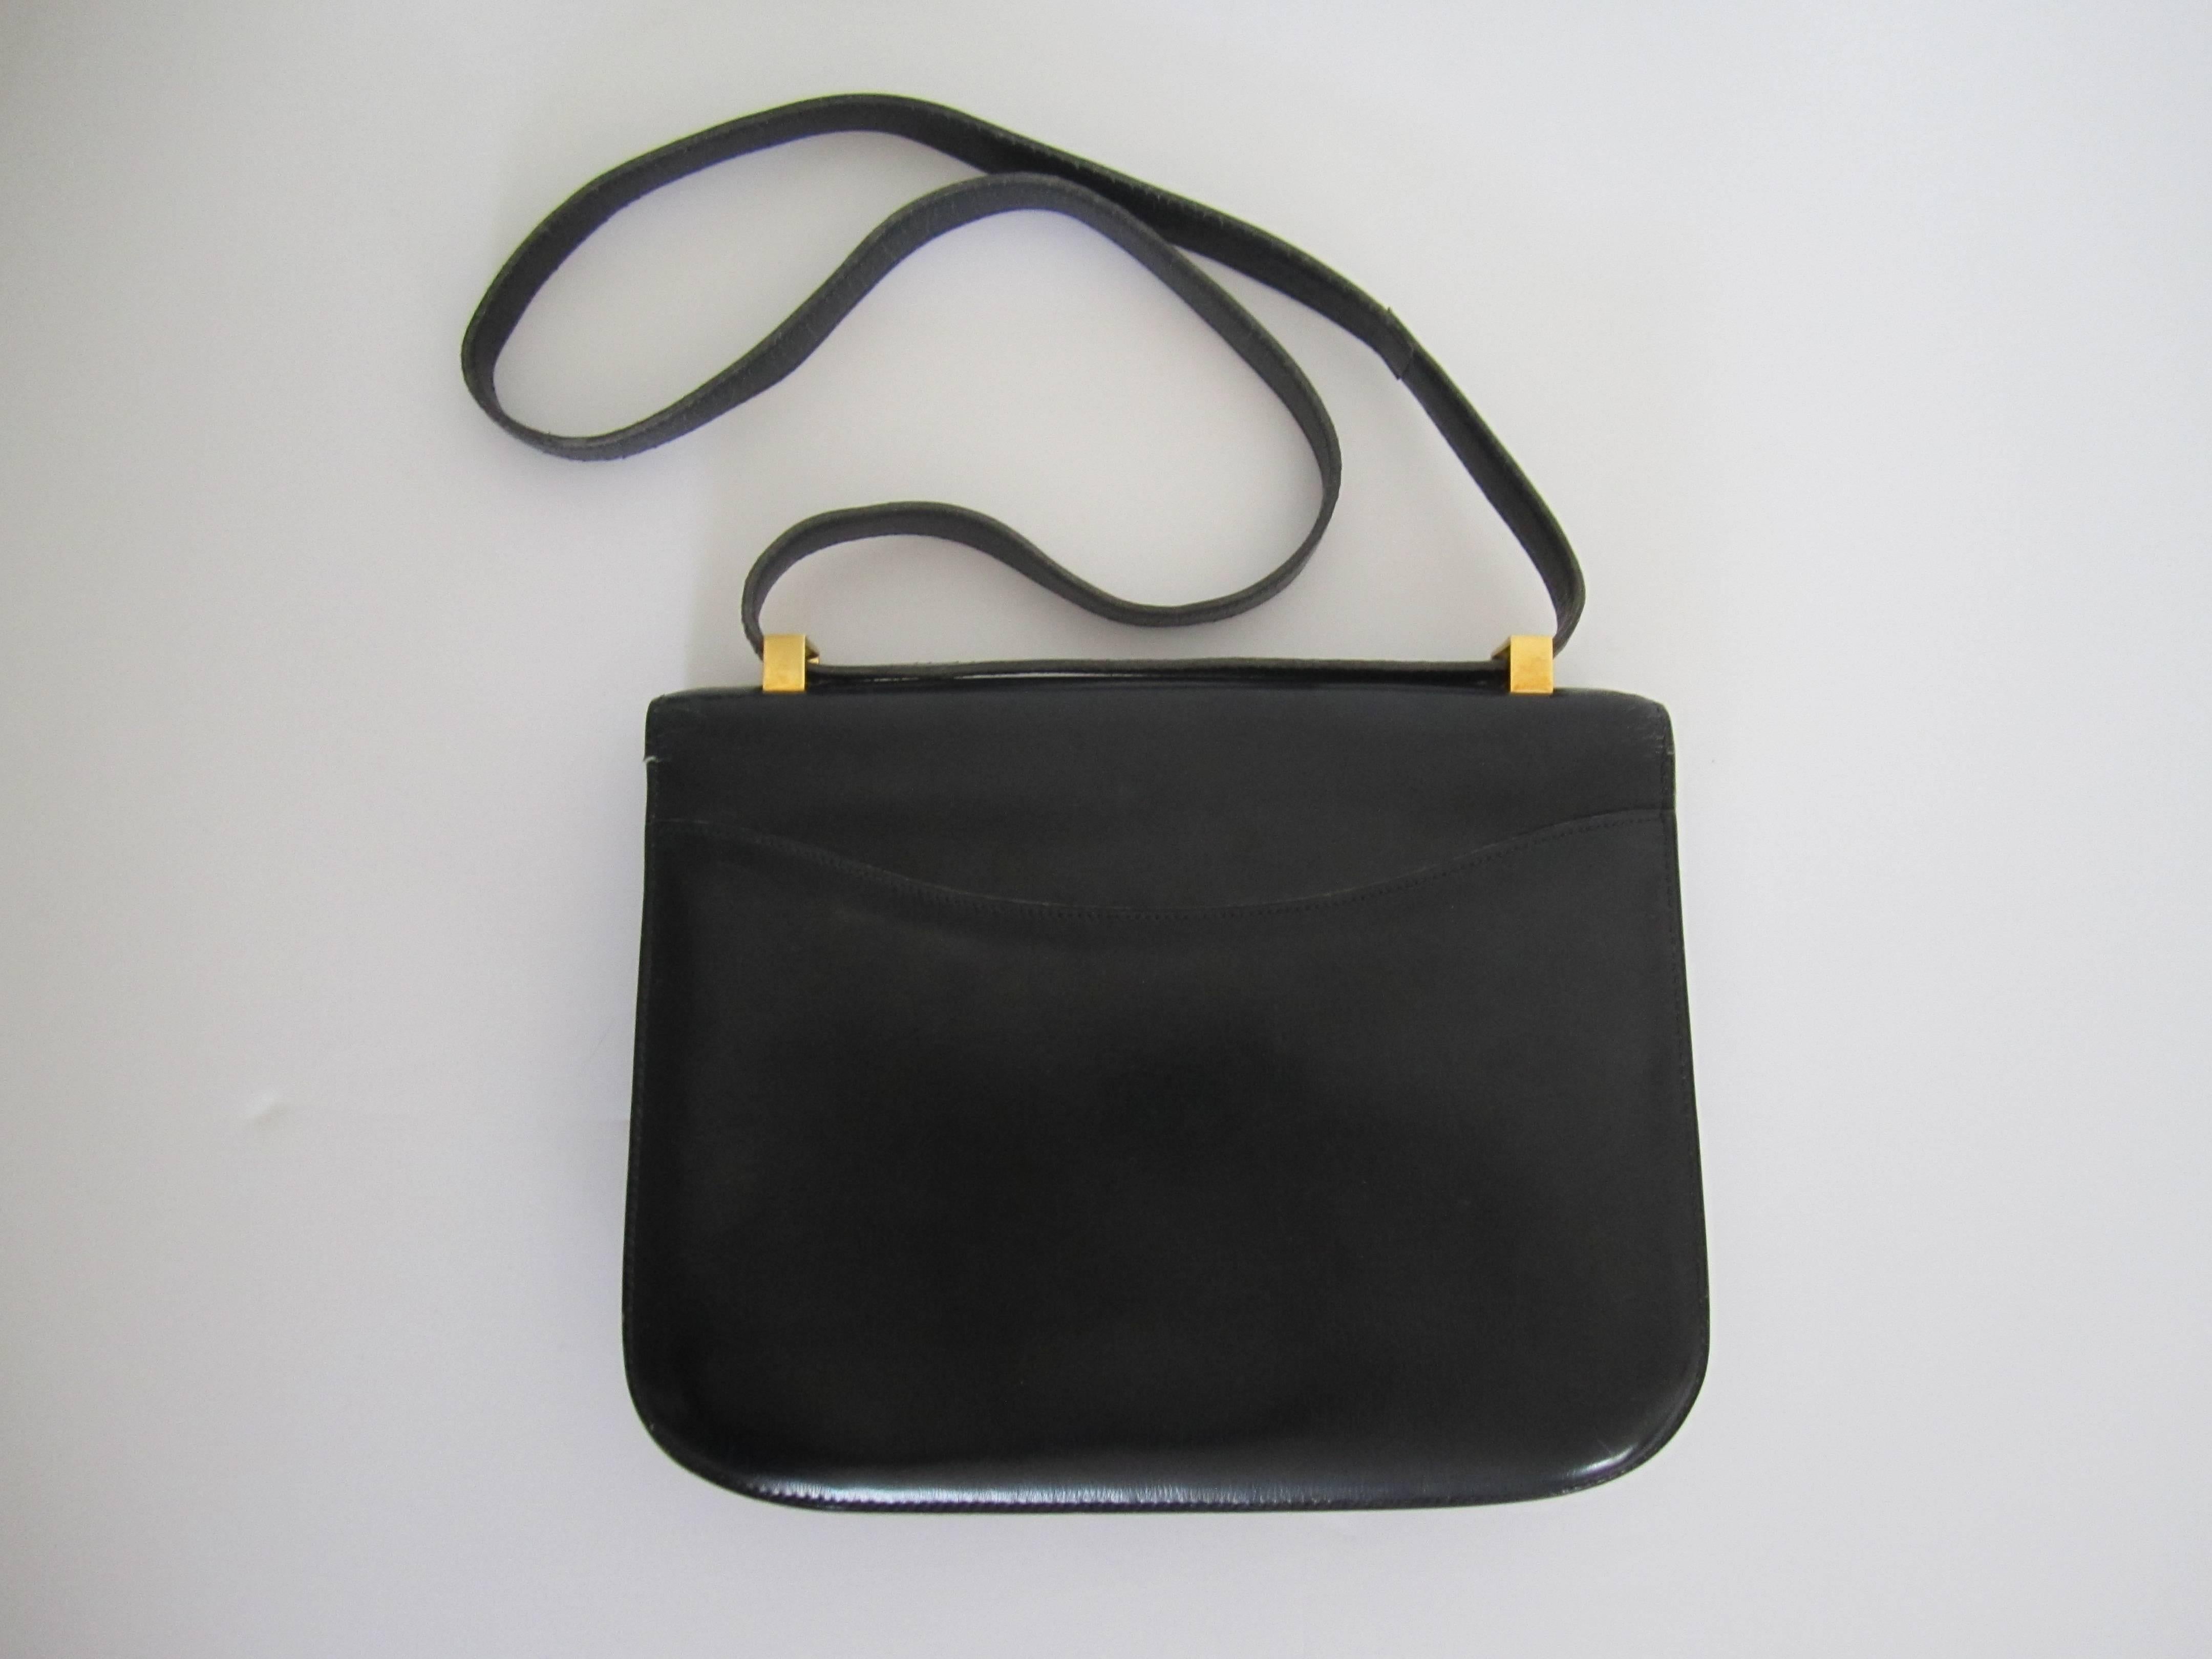 Late 20th Century Black and Gold Hermès Constance Bag, France